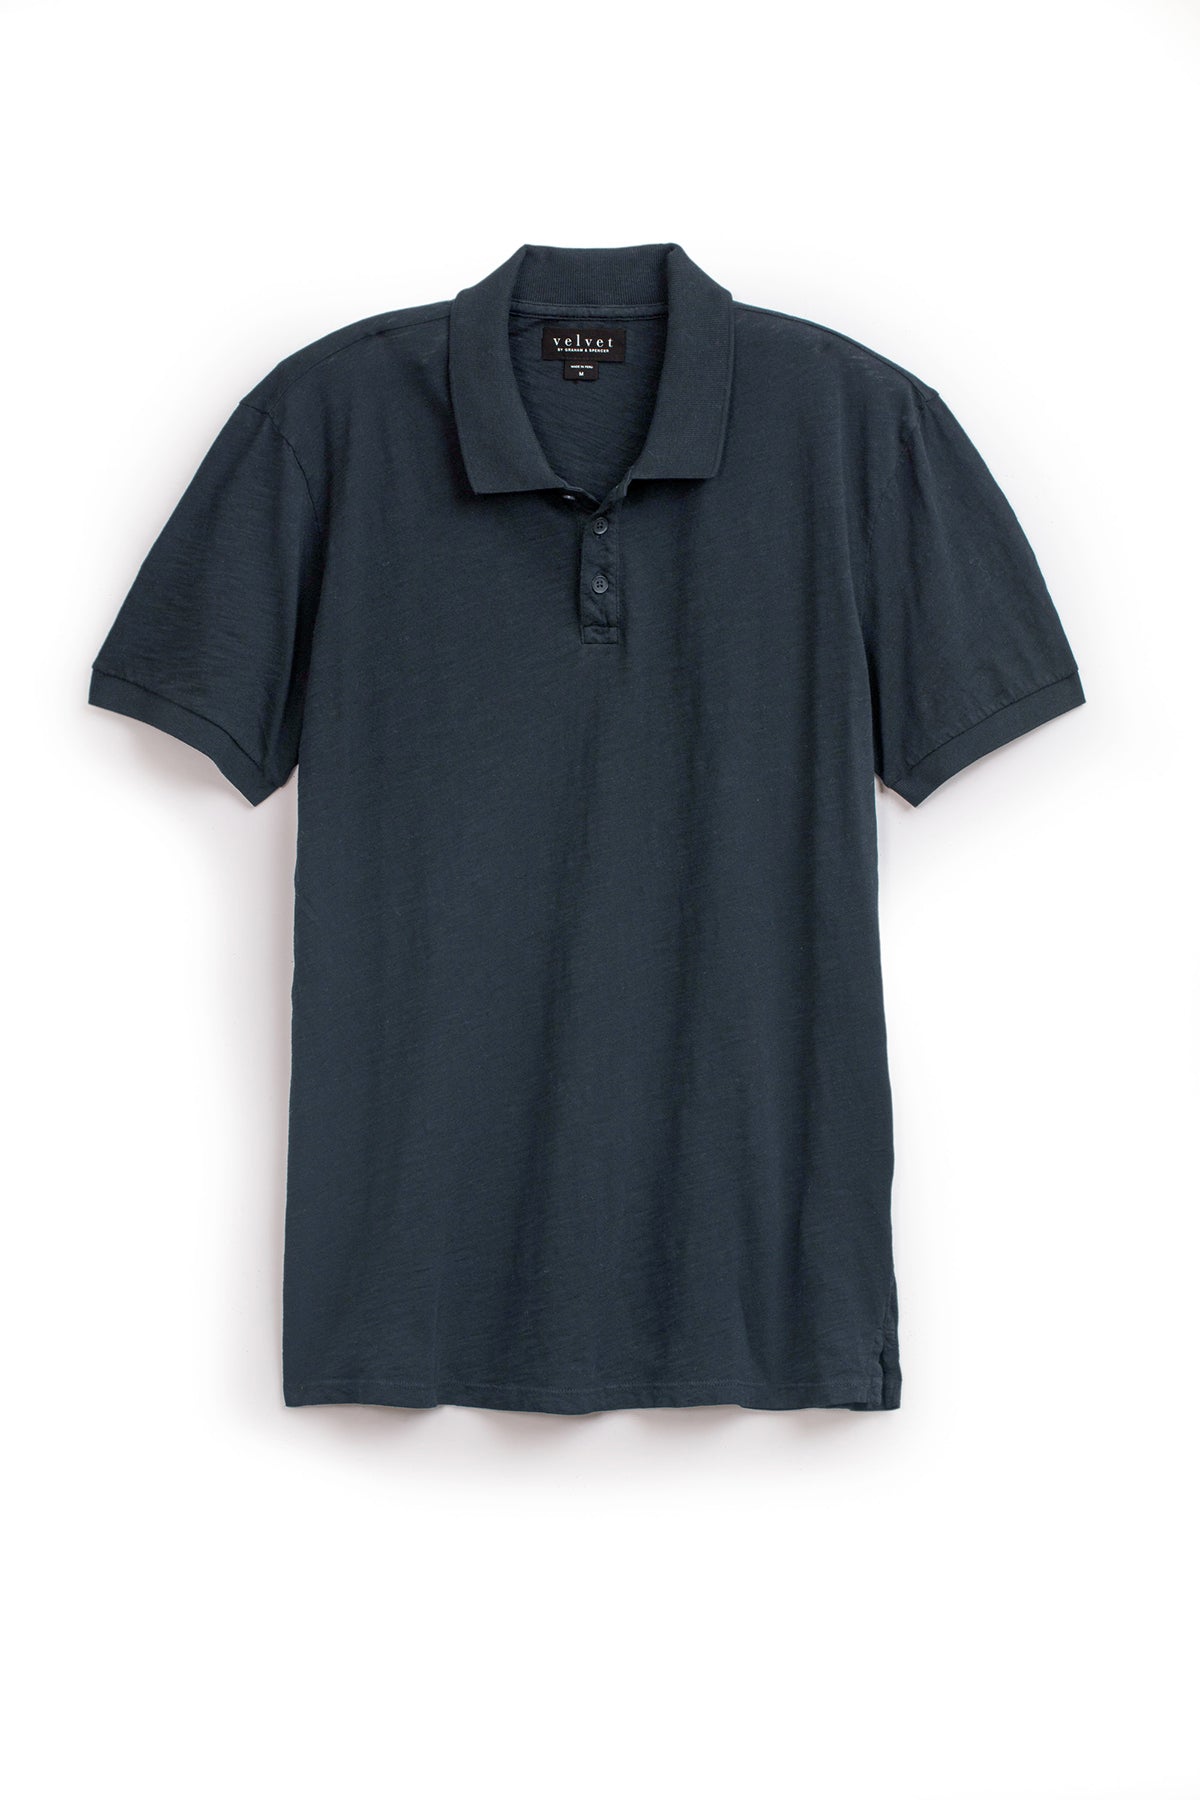 A NIKO POLO by Velvet by Graham & Spencer hanging on a white background.-26705891754177